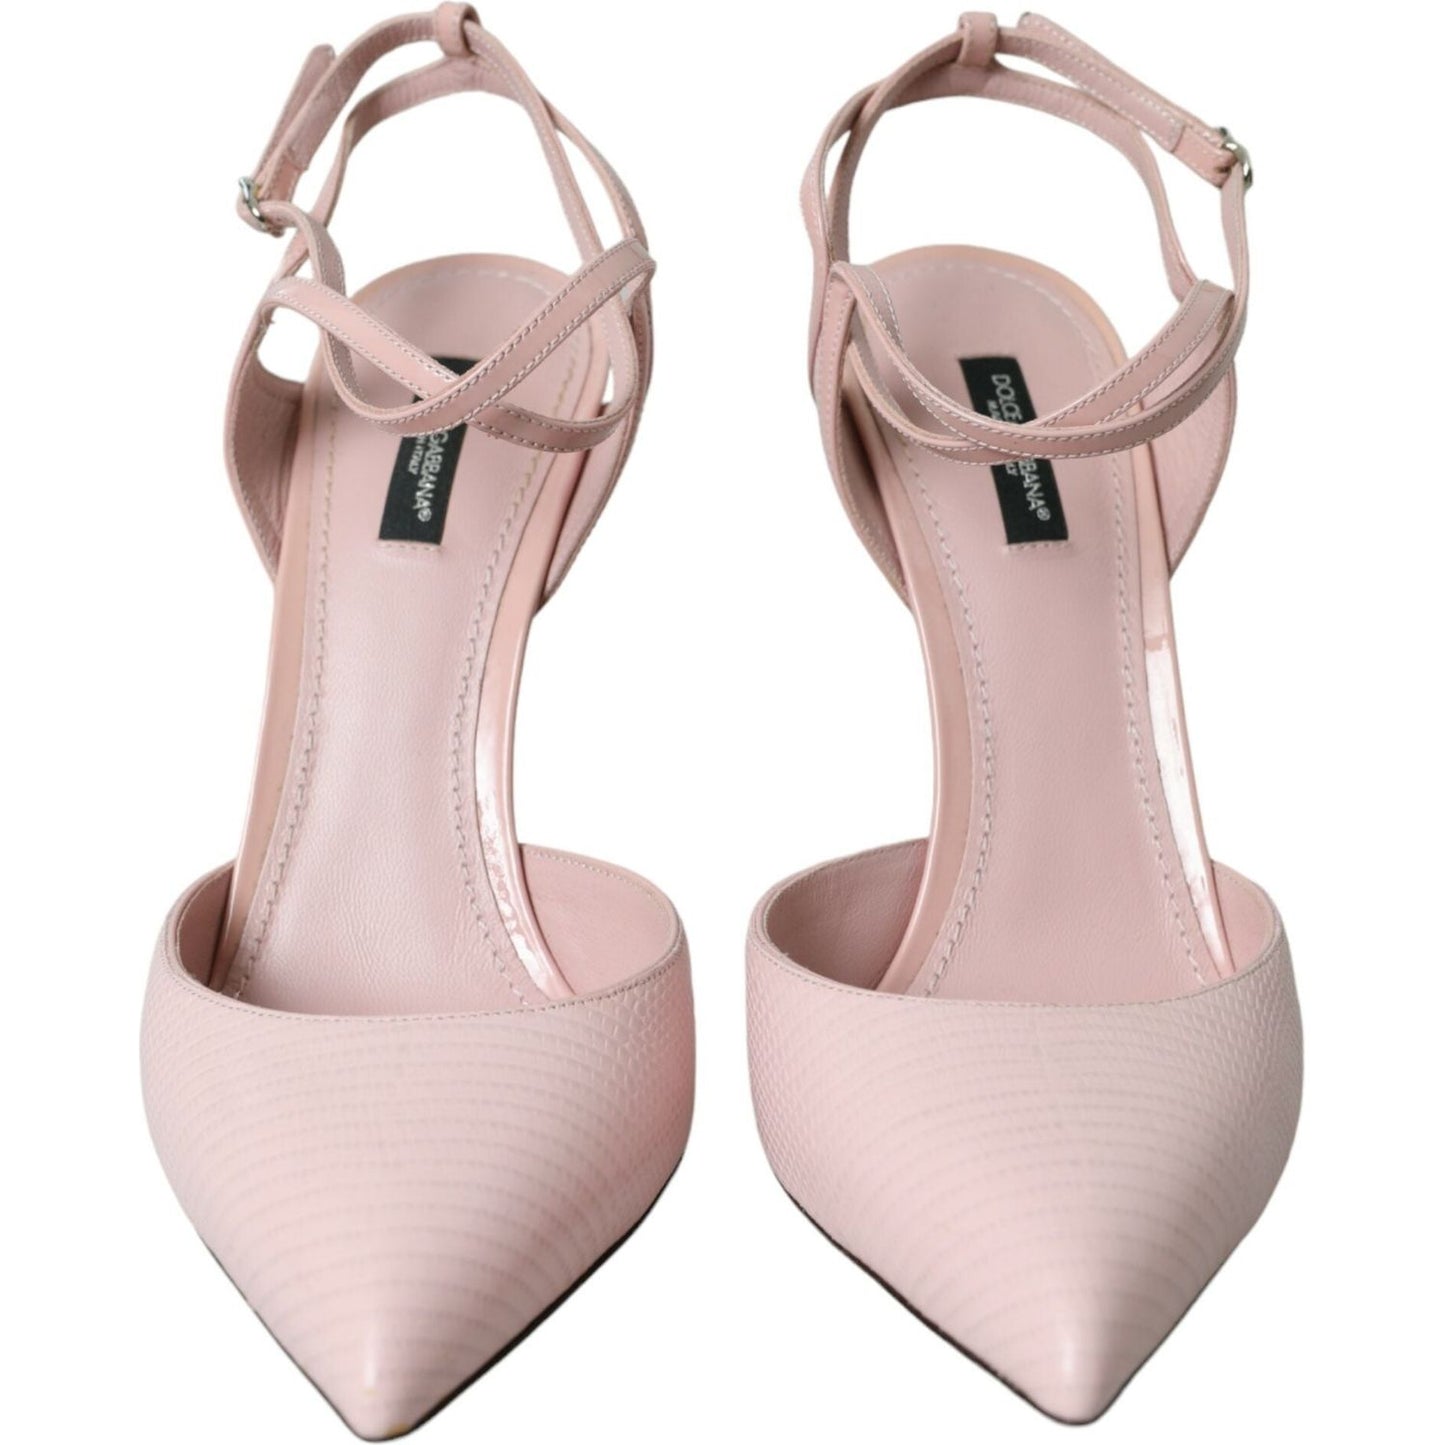 Dolce & Gabbana Pink Leather Ankle Strap Heels Pumps Shoes pink-leather-ankle-strap-heels-pumps-shoes